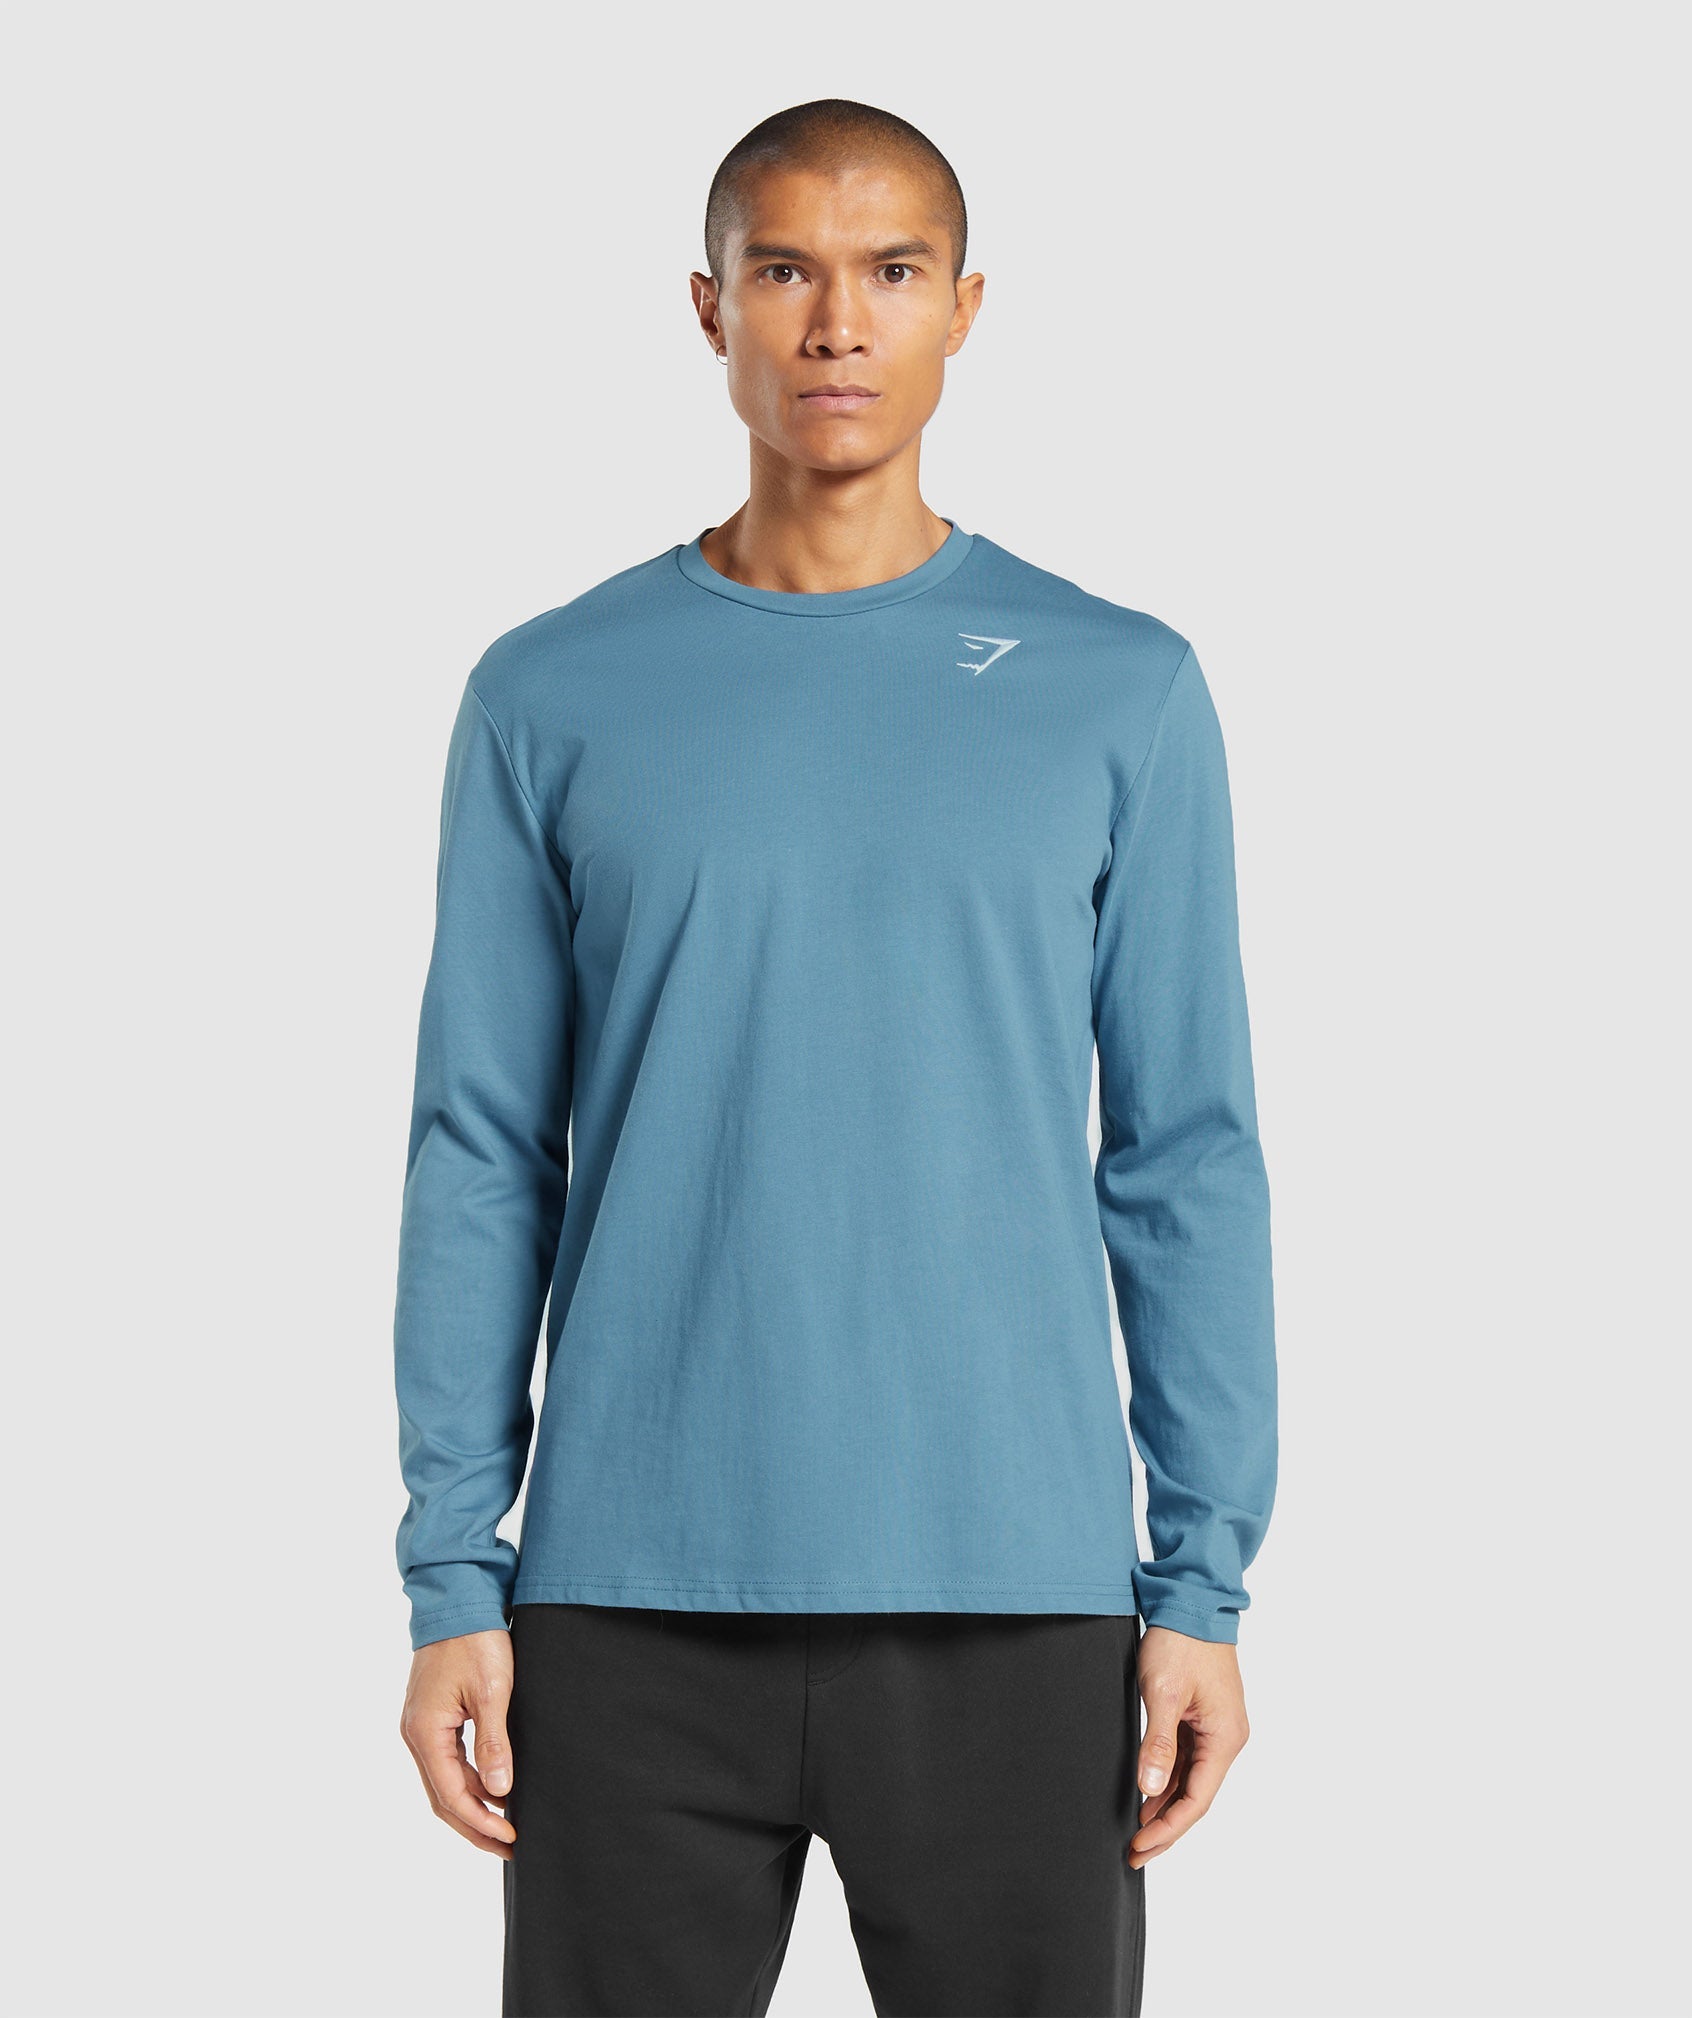 Crest Long Sleeve T-Shirt in Faded Blue